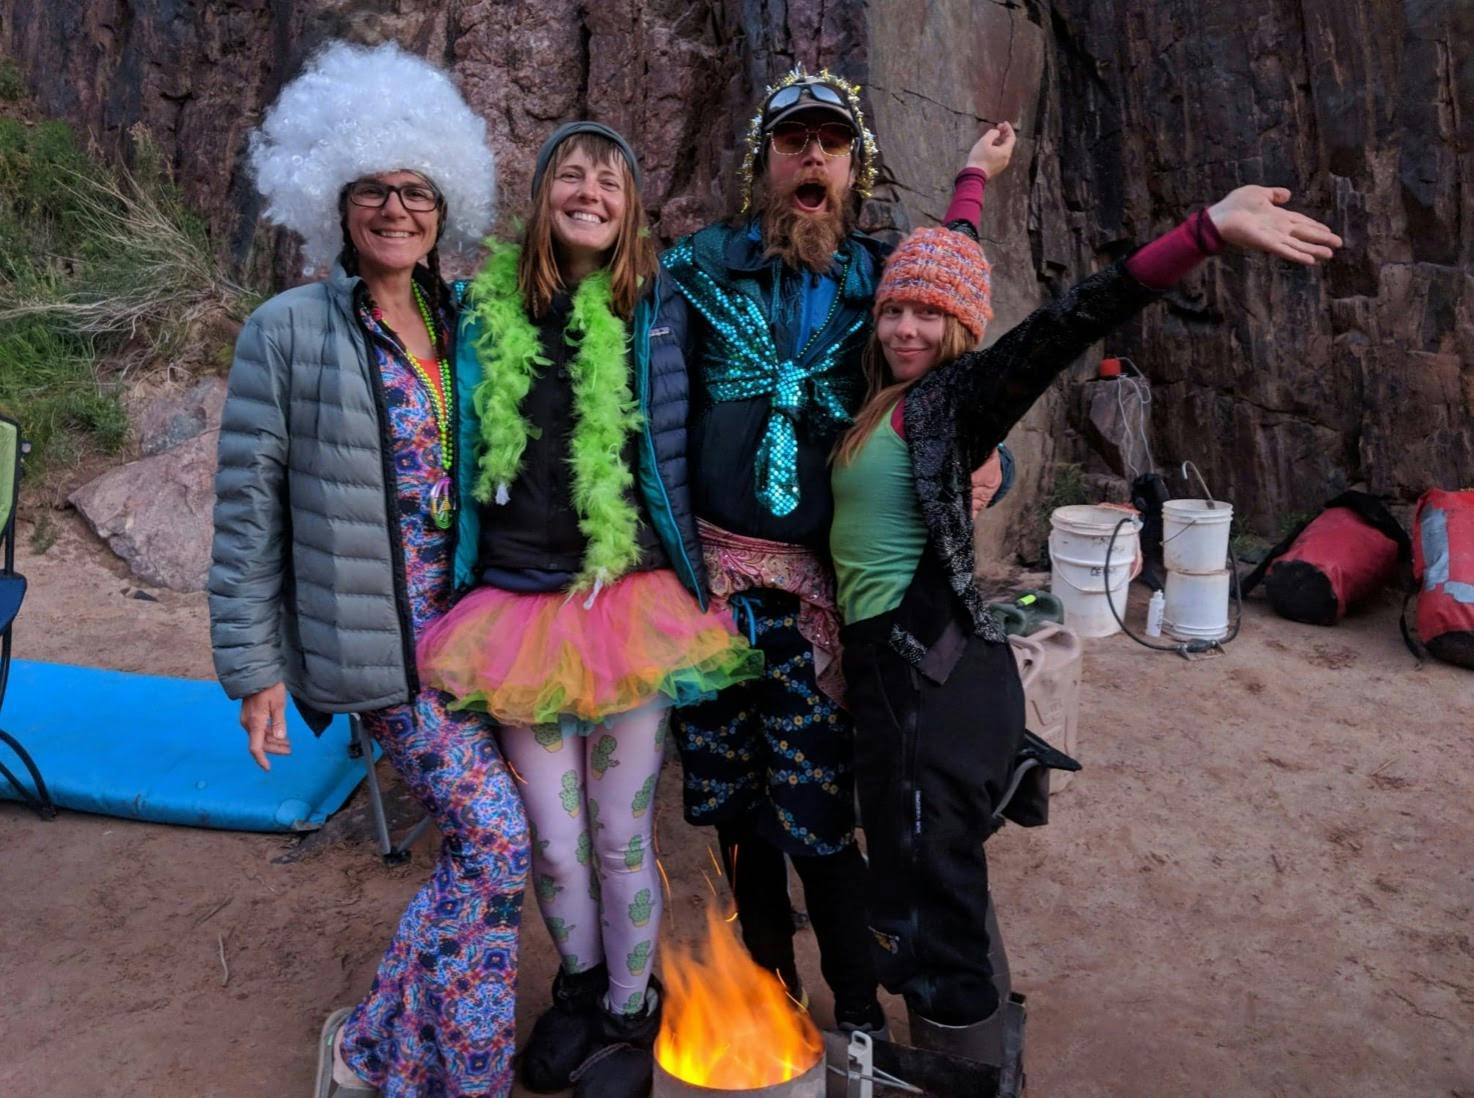 Group of hikers wearing funky costumes celebrating near a fire pit